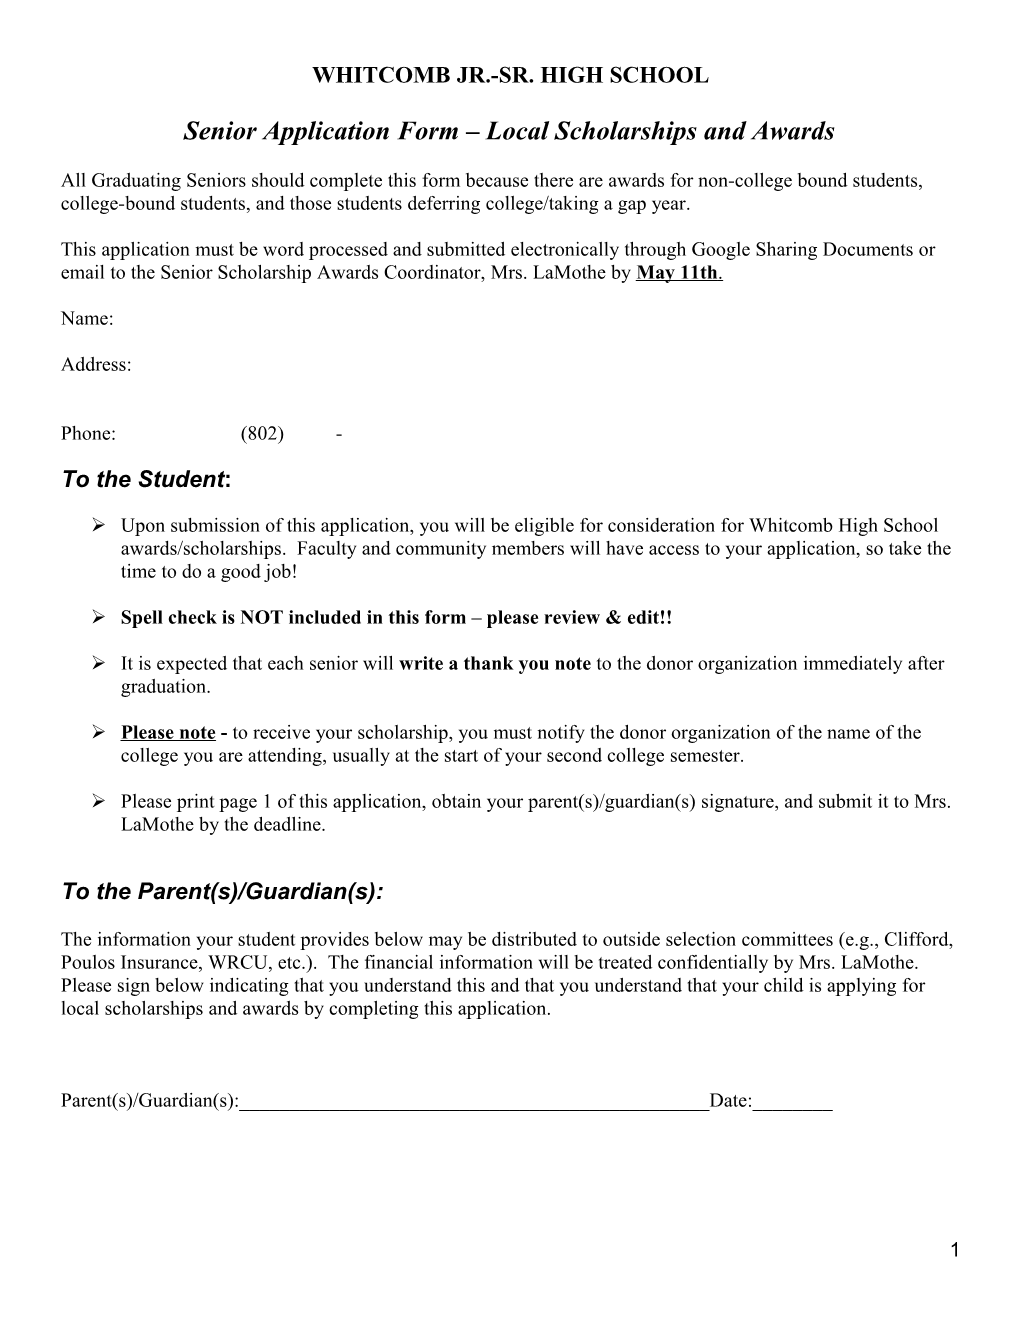 Senior Application Form Local Scholarships and Awards